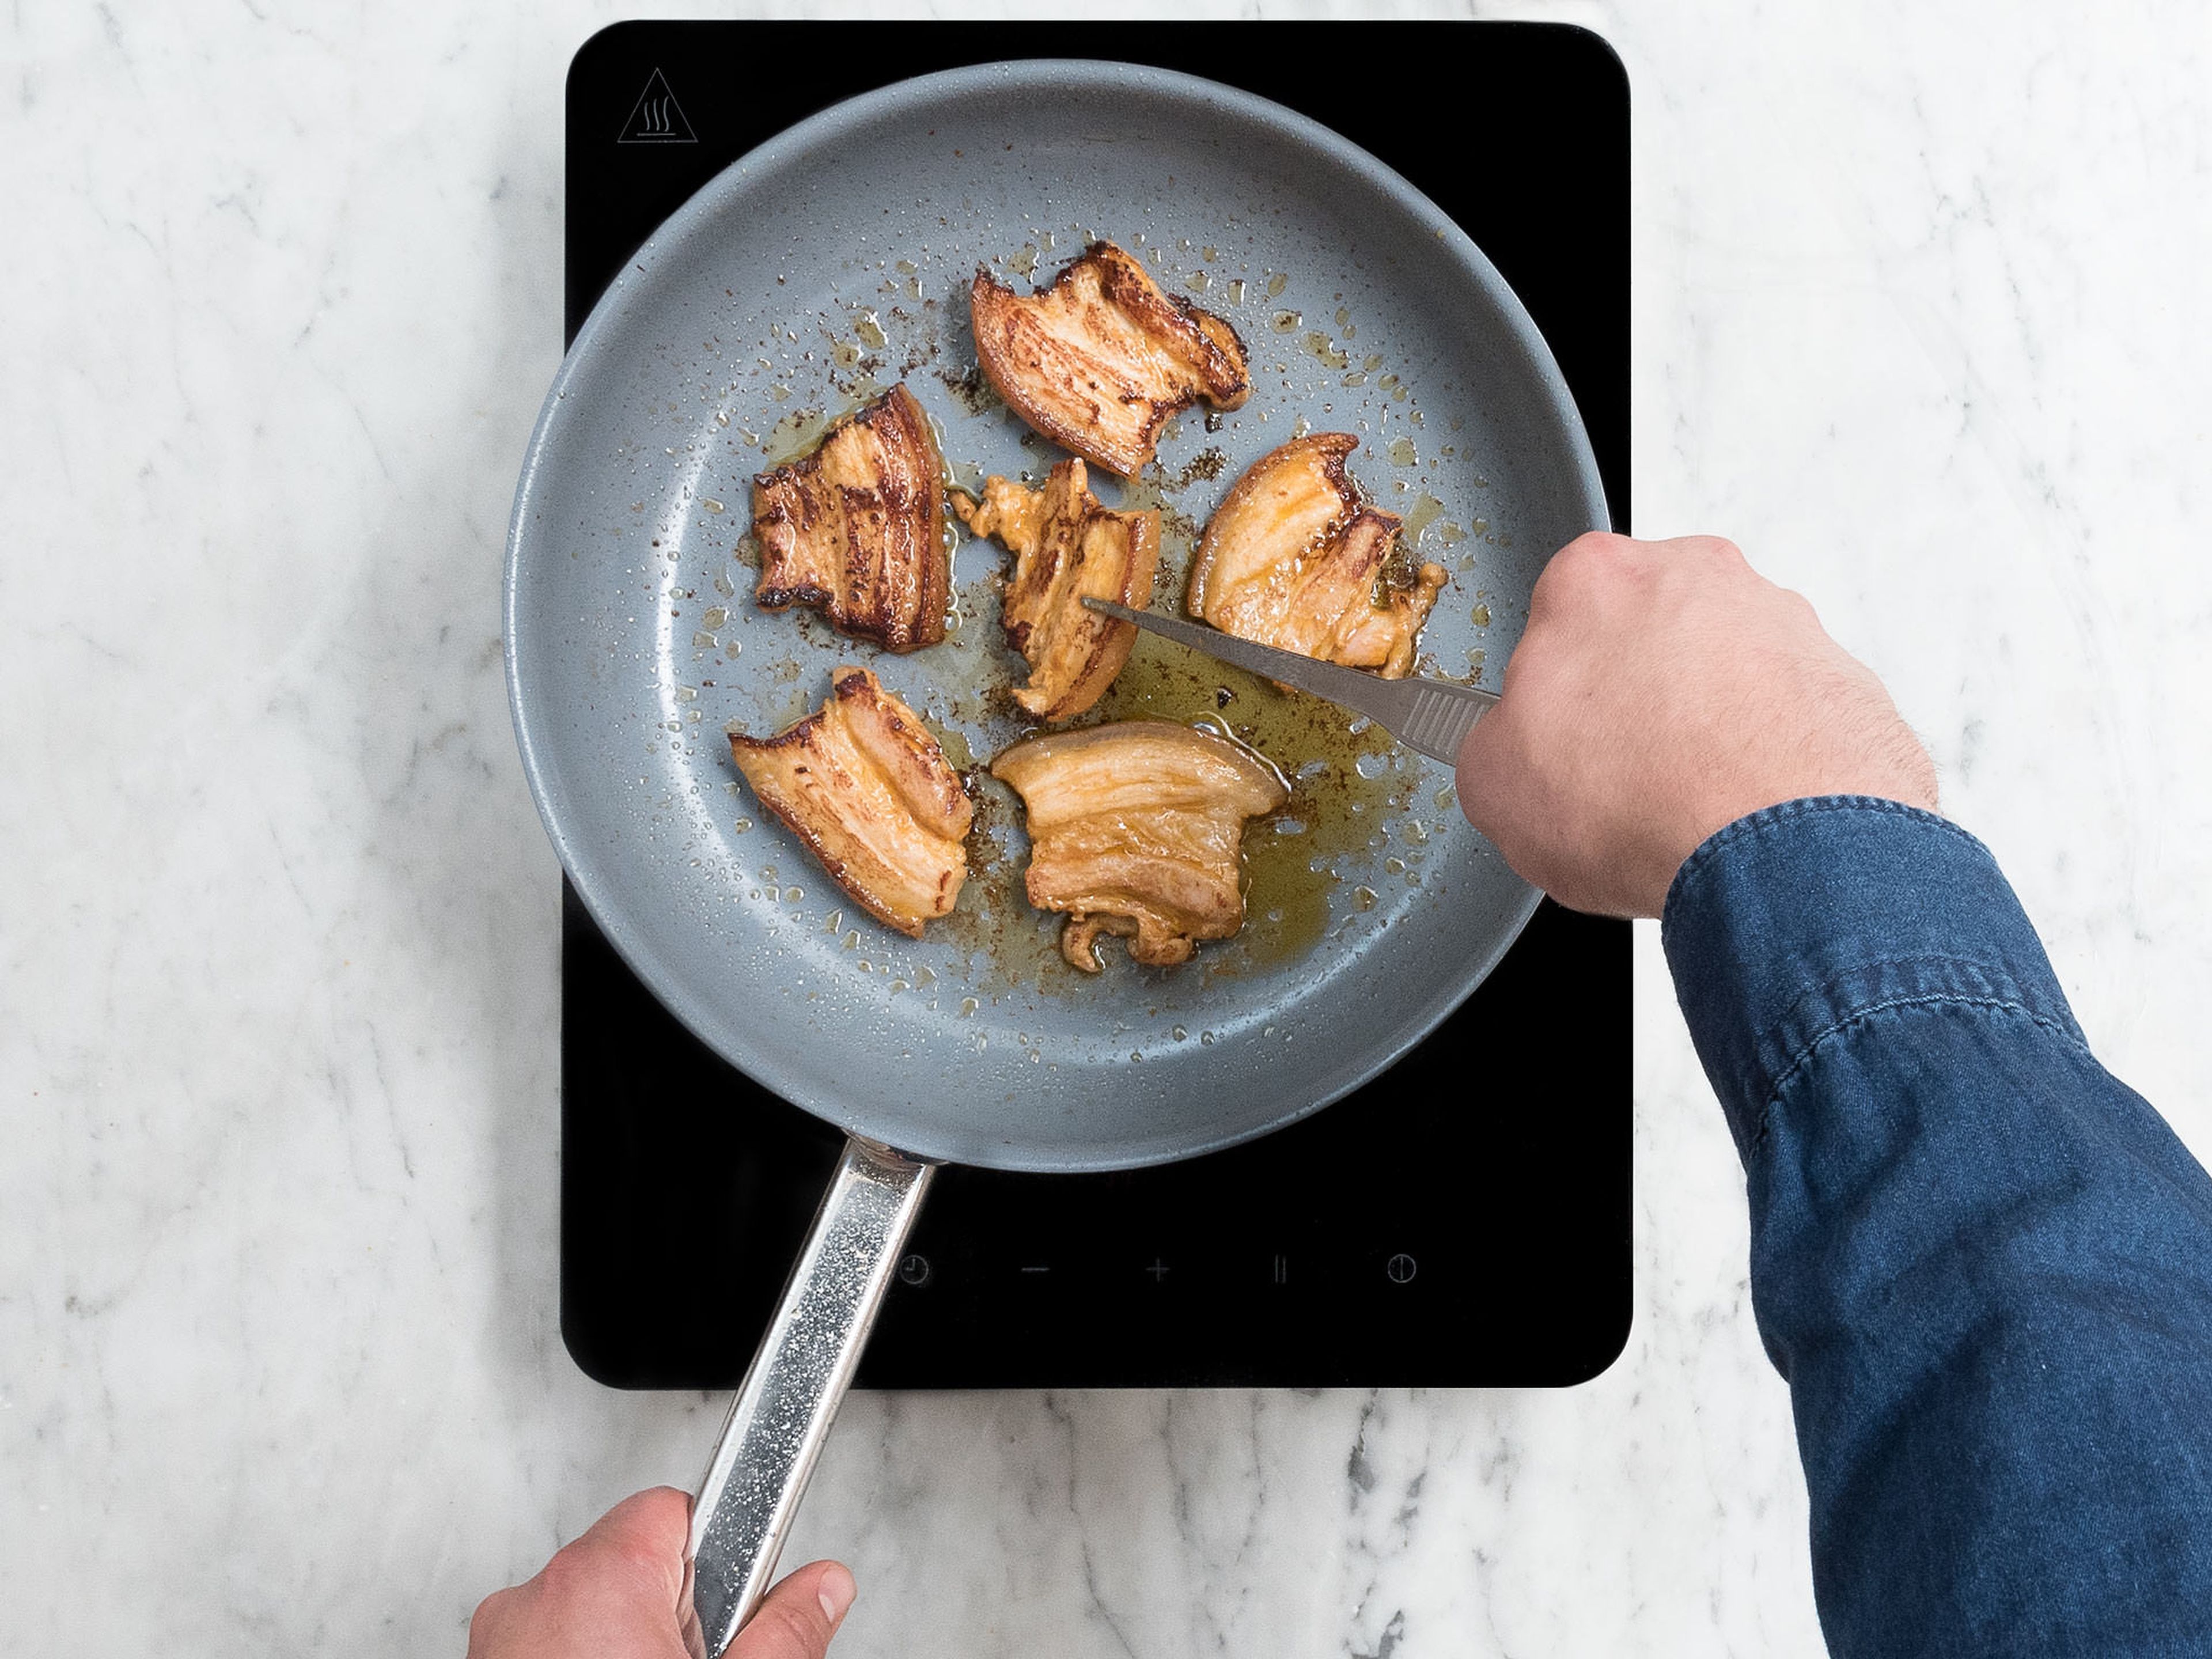 In a frying pan, heat some vegetable oil over medium-high heat. Add marinated slice pork belly and sear for approx. 2 – 3 min. on each side.